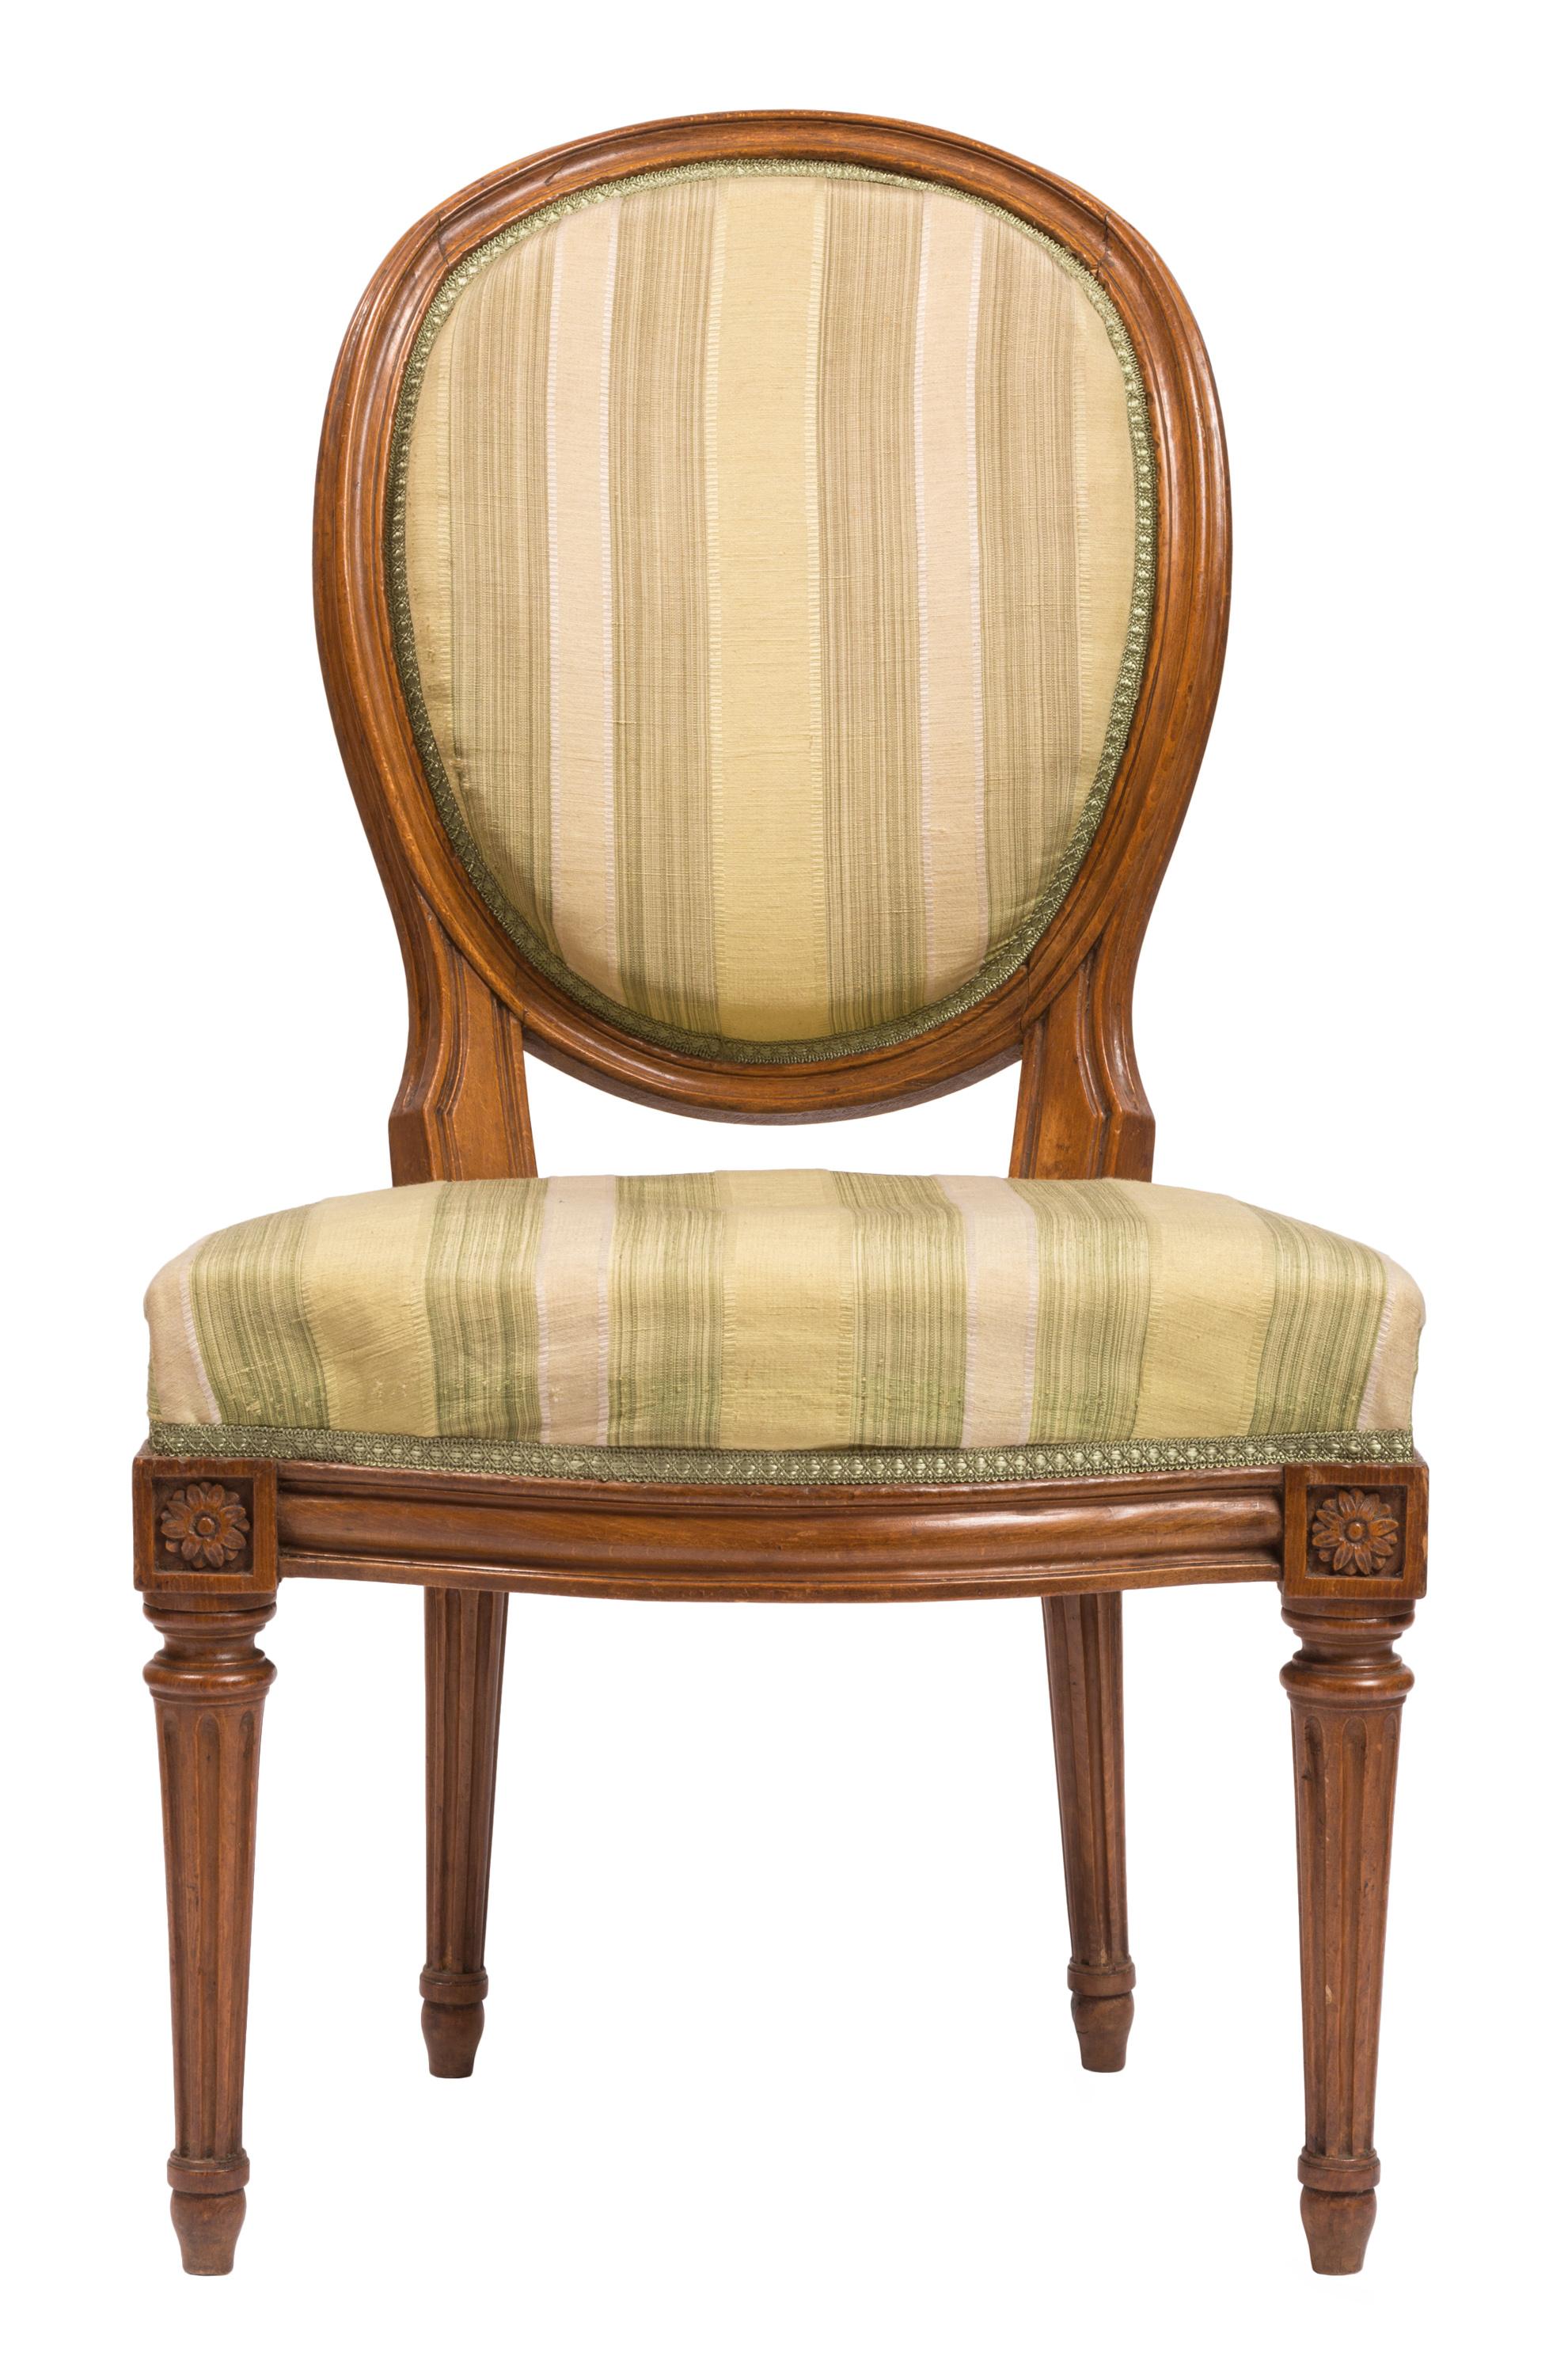 Set of Four Louis XVI Style Chairs with Striped Silk Upholstery, 19th Century For Sale 3